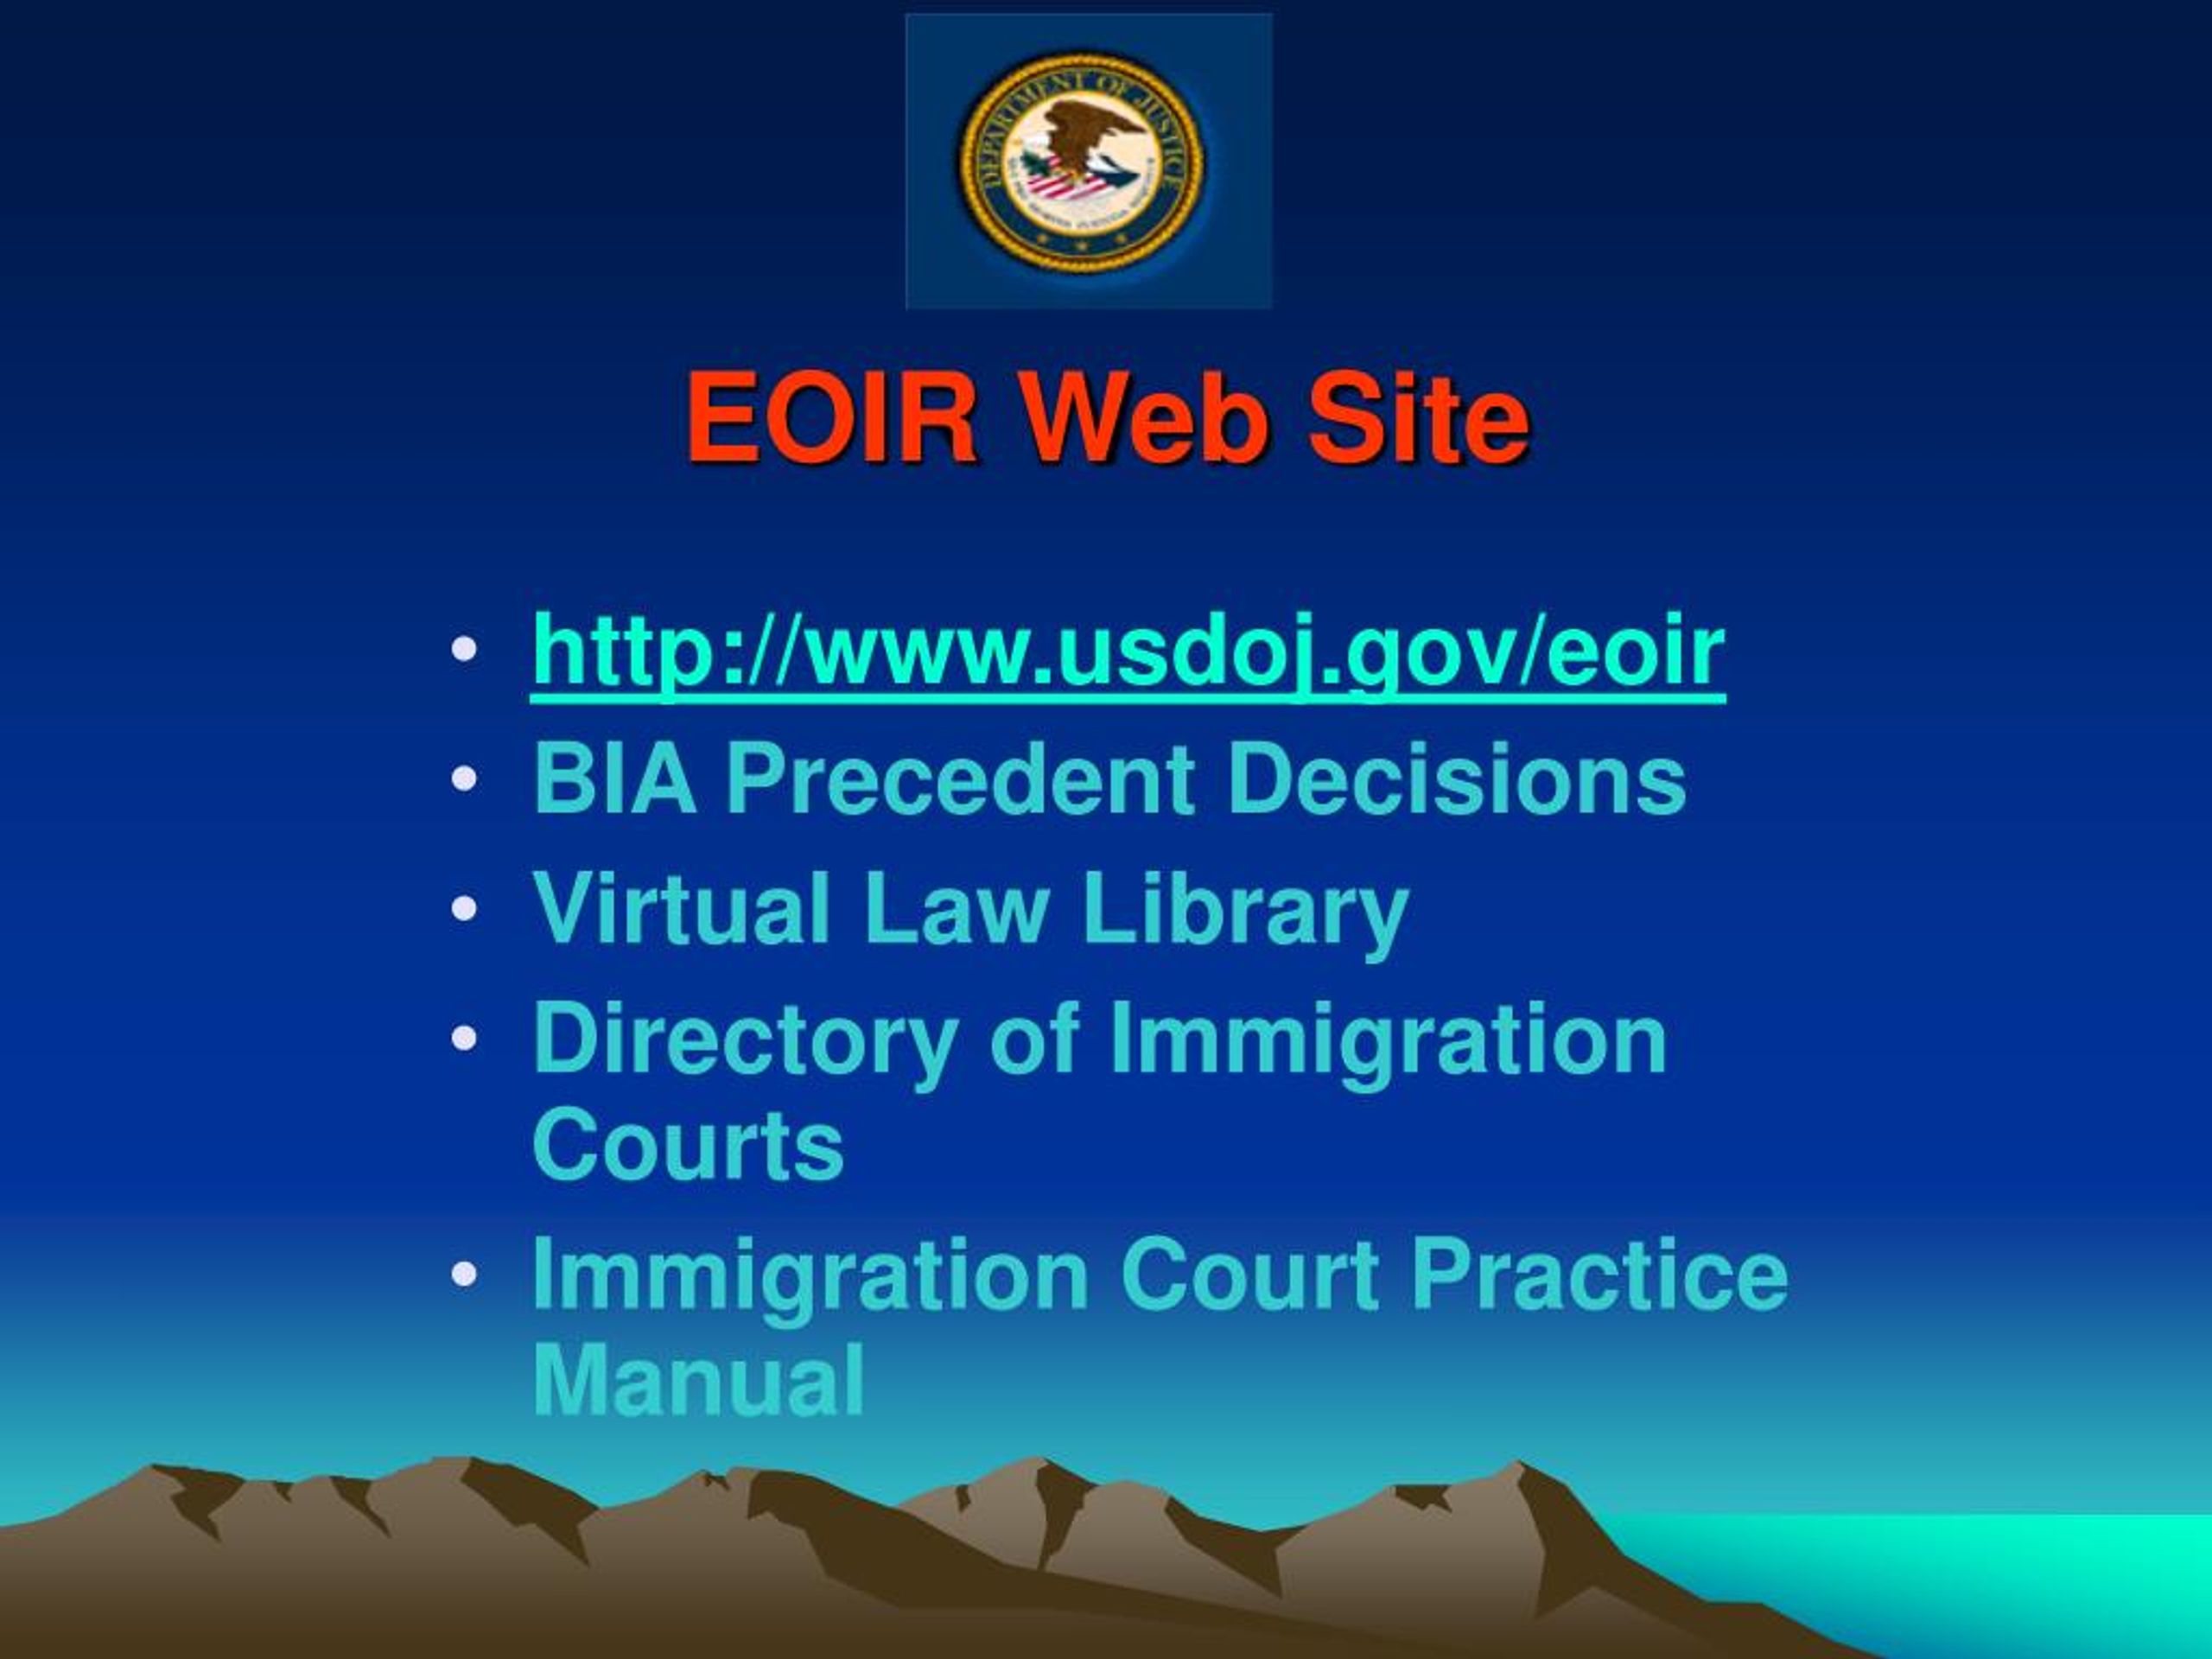 PPT How to Use the Web to Practice Immigration Law PowerPoint